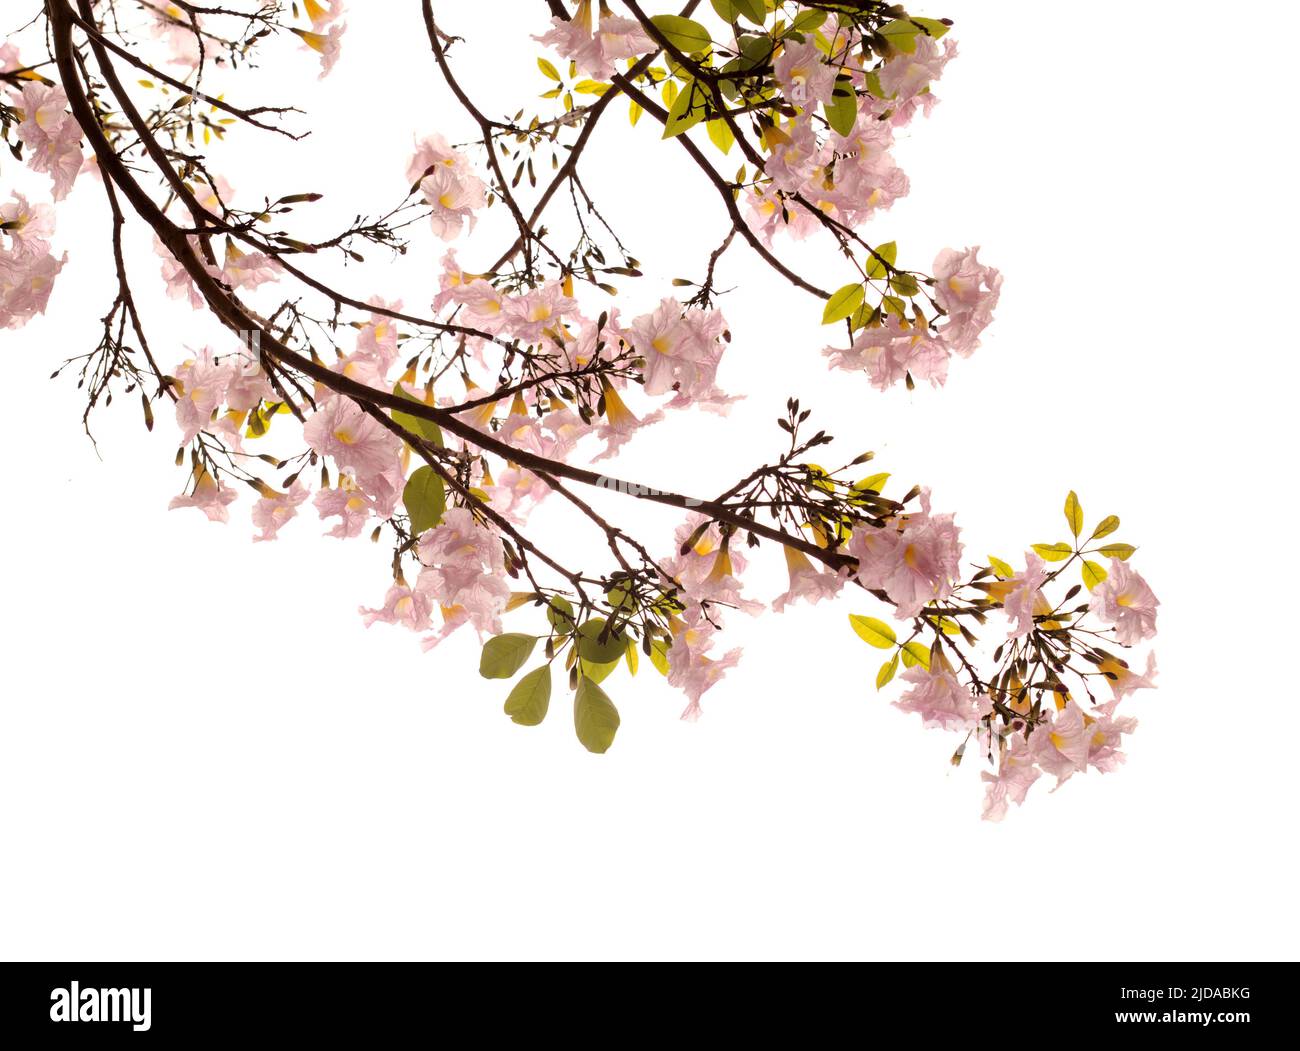 Tabebuia heterophylla, pink trumpet tree, flowering branches isolated on white background Stock Photo